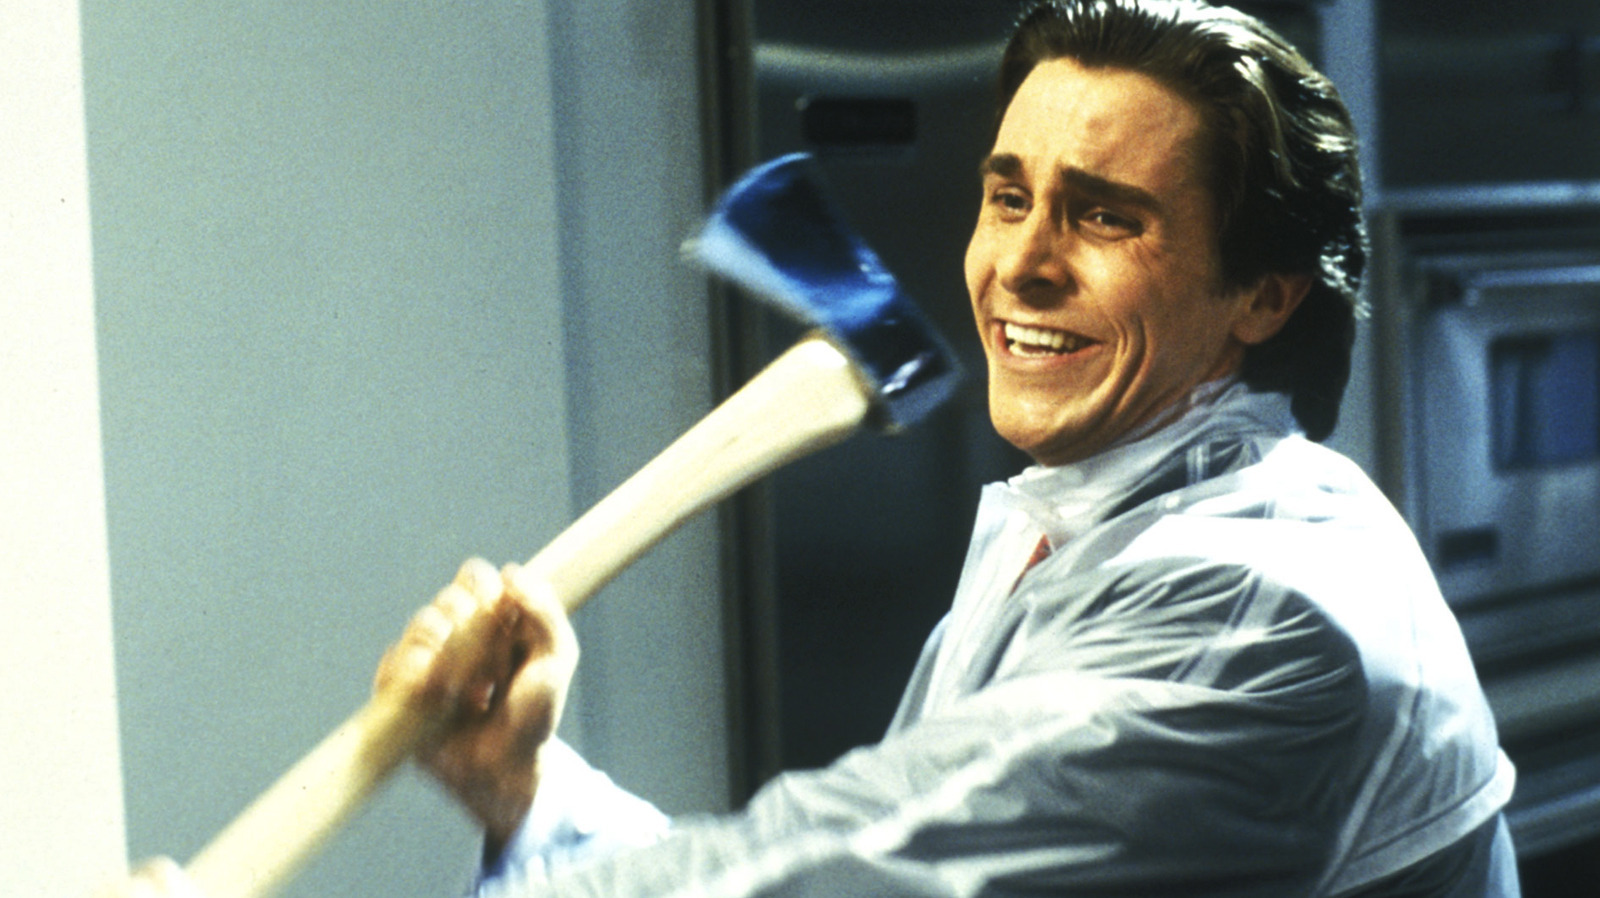 Christian Bale American Psycho Method Acting - Patrick Bateman Actor Says  His Co-Stars The Worst Actor